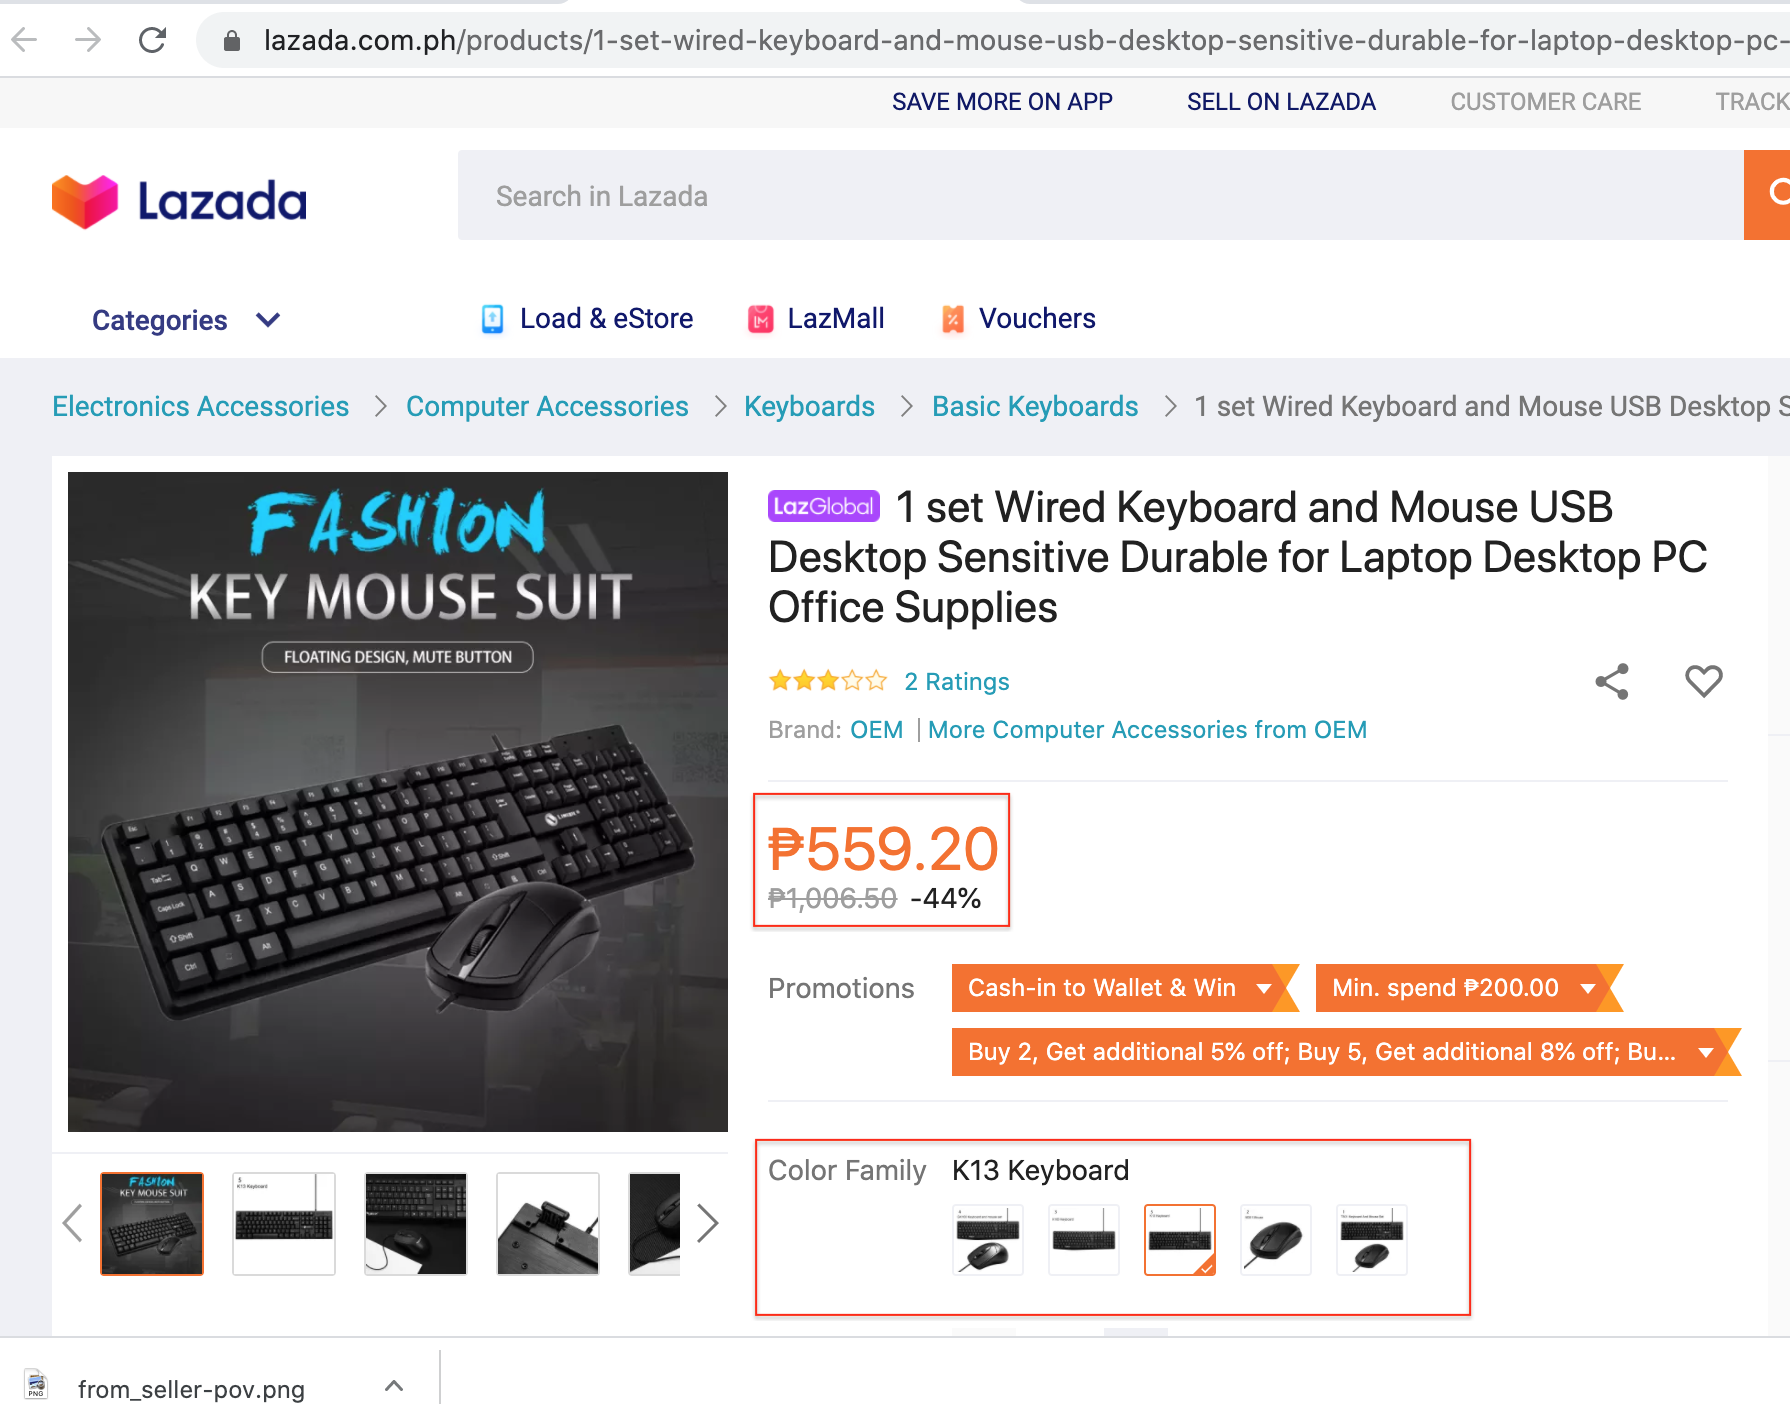 Keyboard1 with a different price